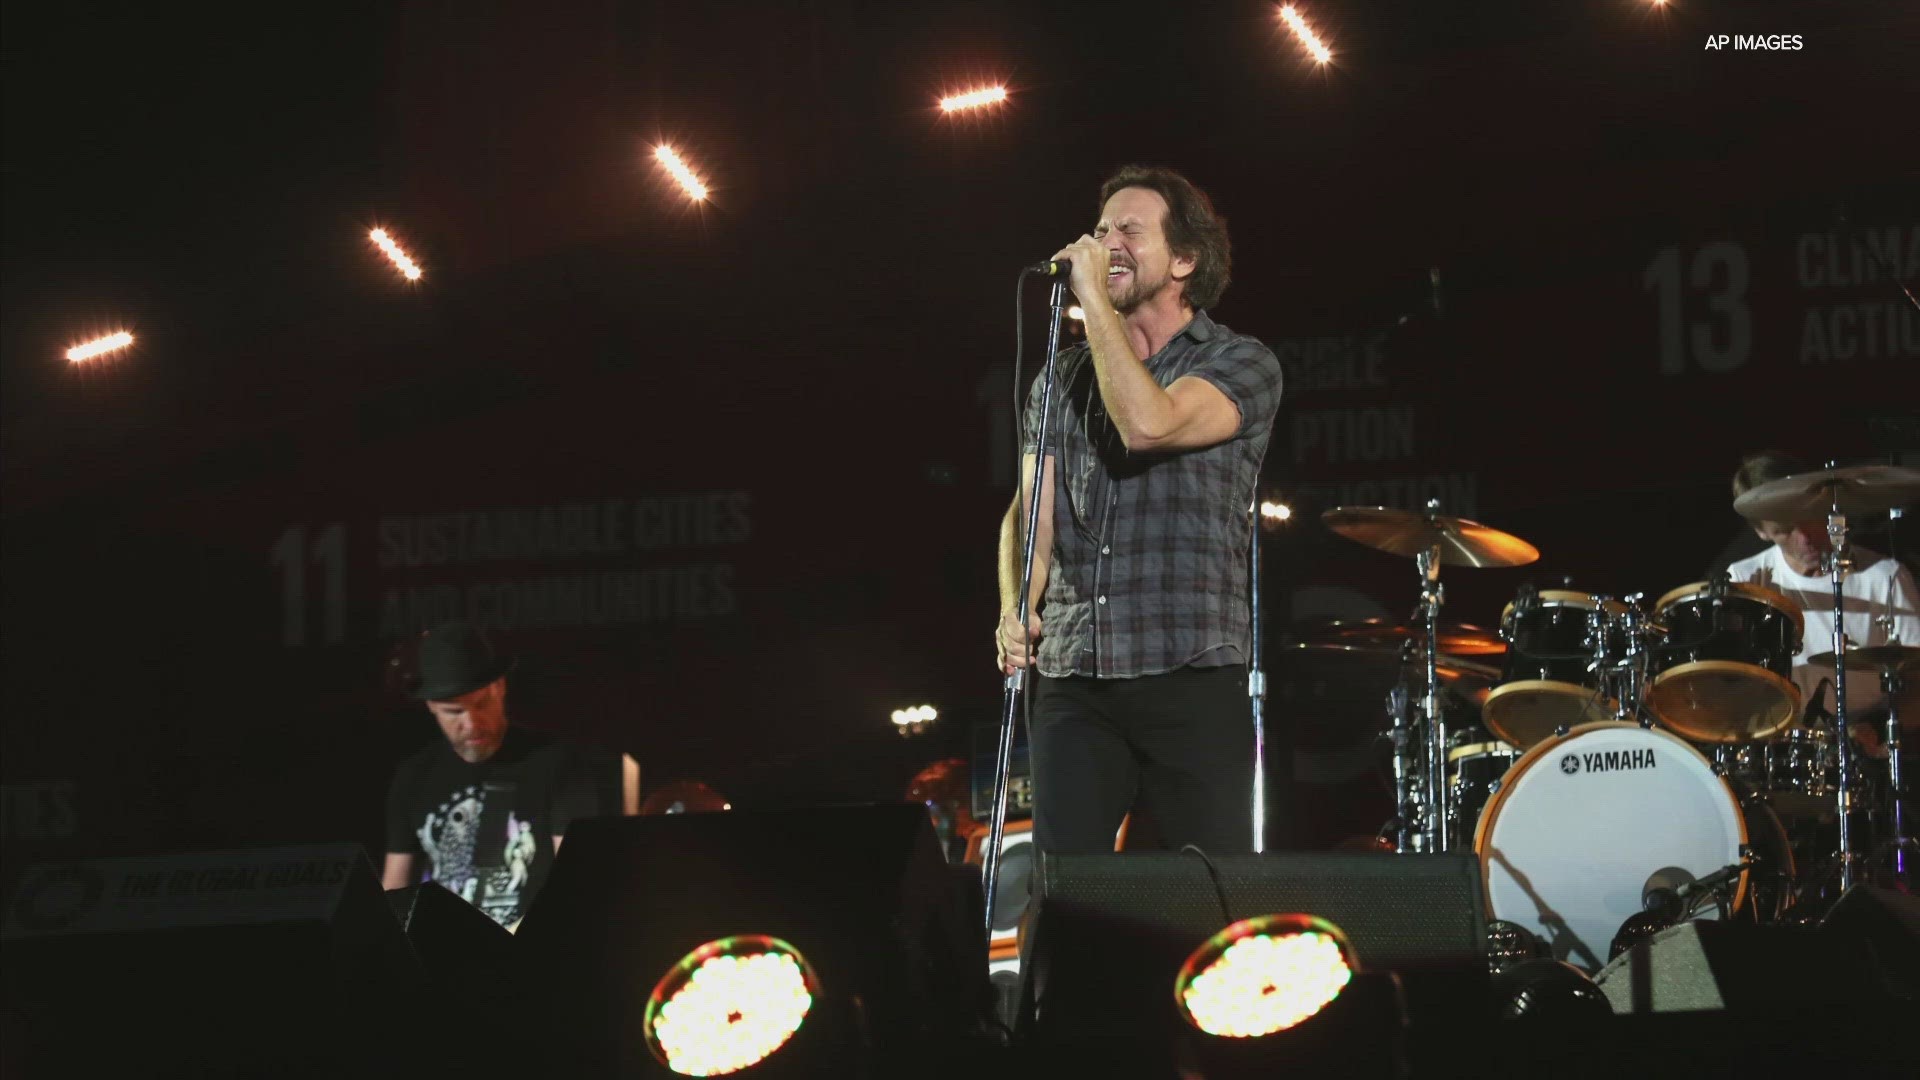 Live Nation announced Pearl Jam has postponed their concert at Ruoff Music Center tonight because of illness.